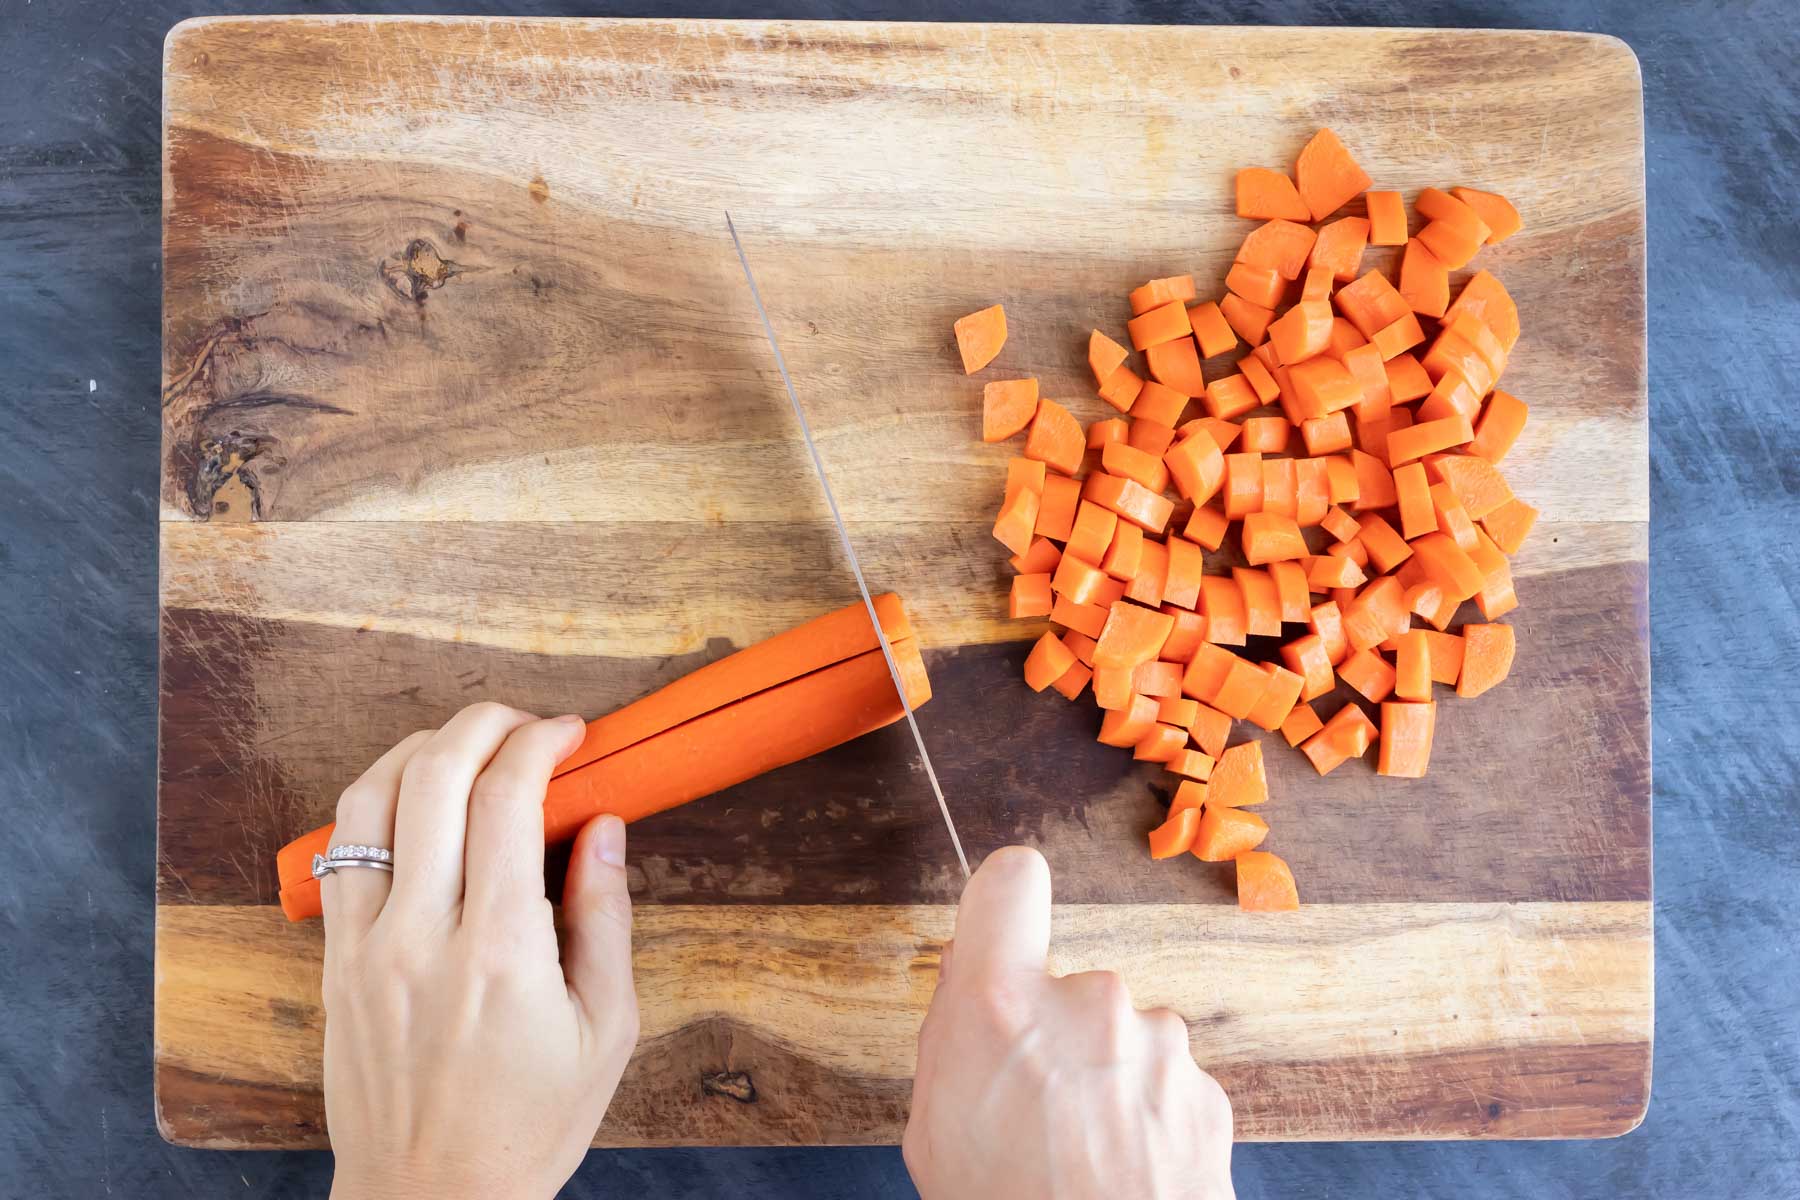 Using a knife to chop carrots on a cutting board.